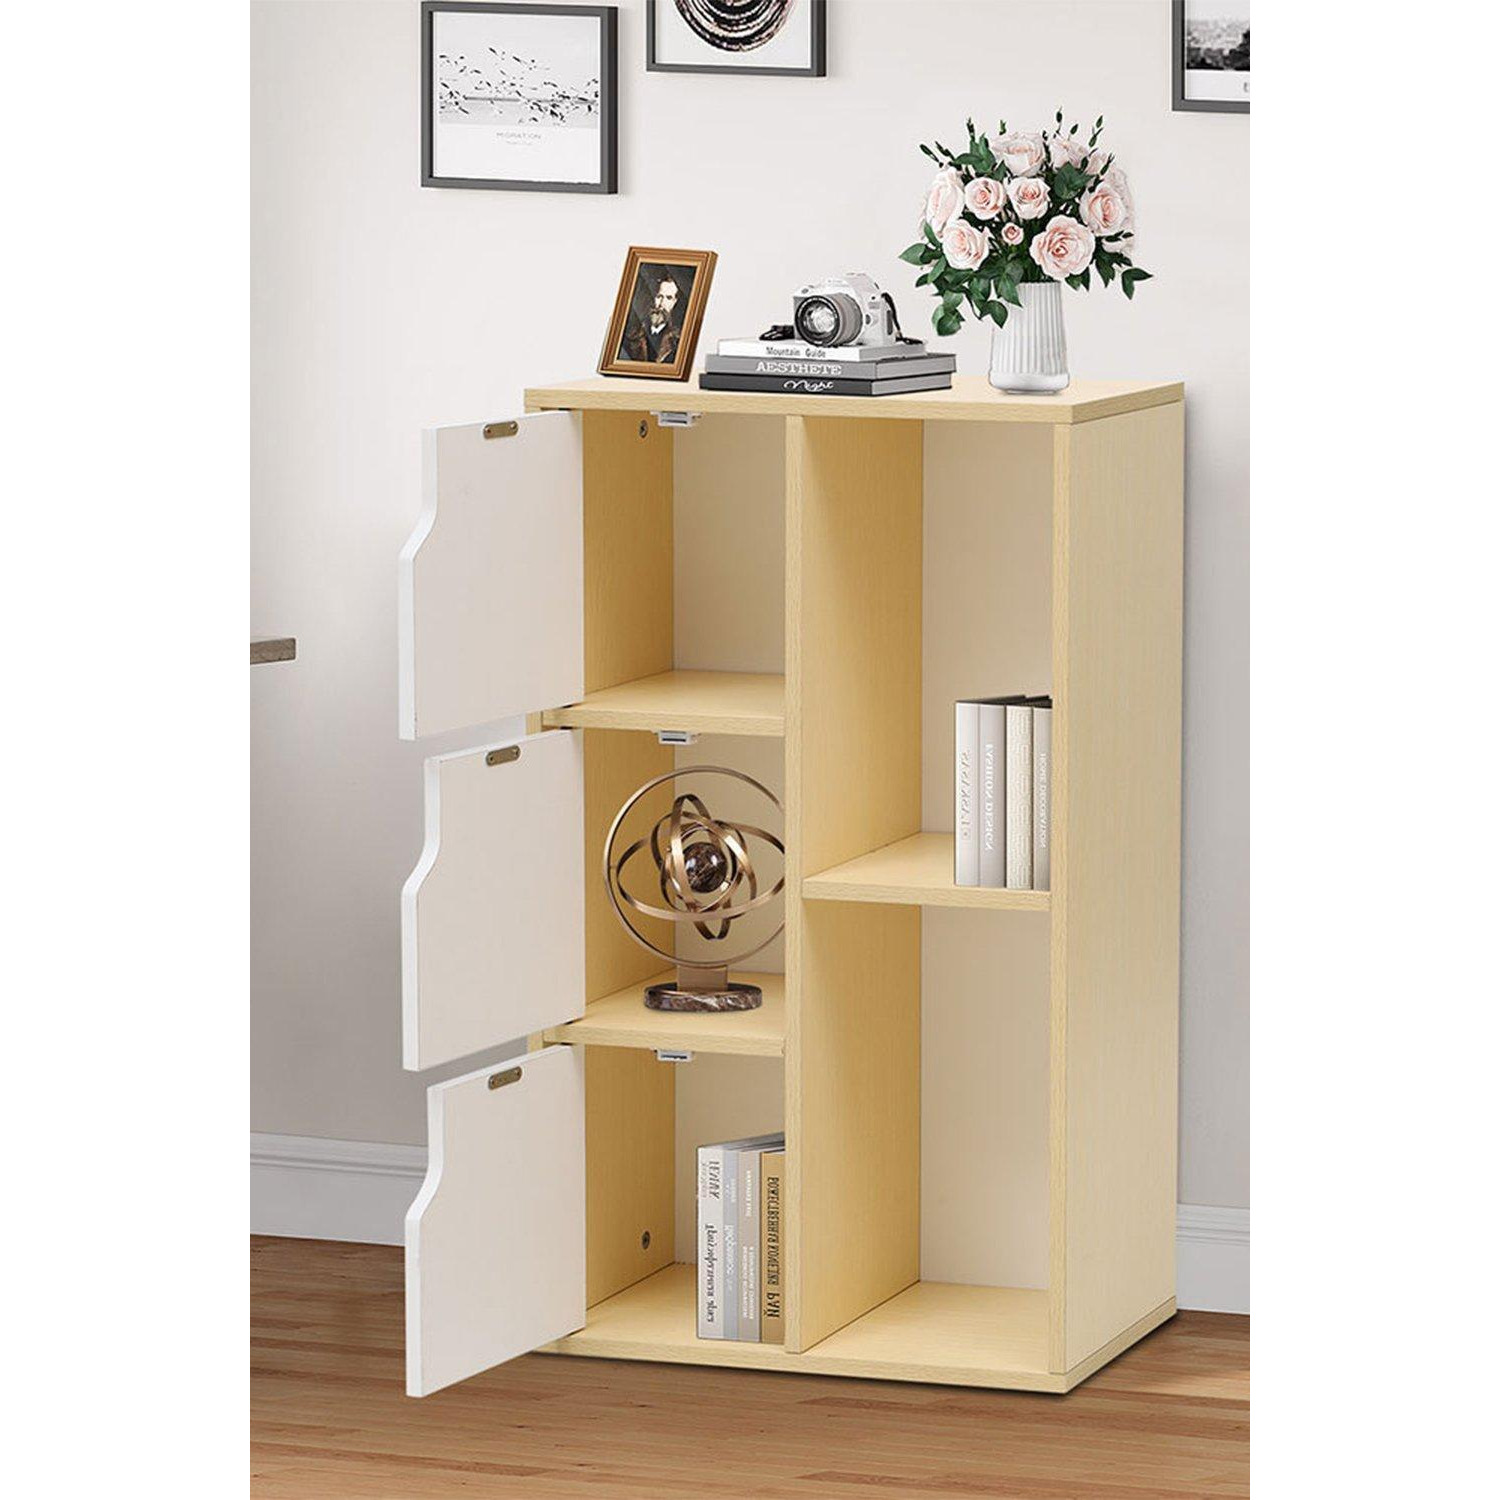 Wooden Bookcase Storage Cabinet with Doors and Open Shelf - image 1